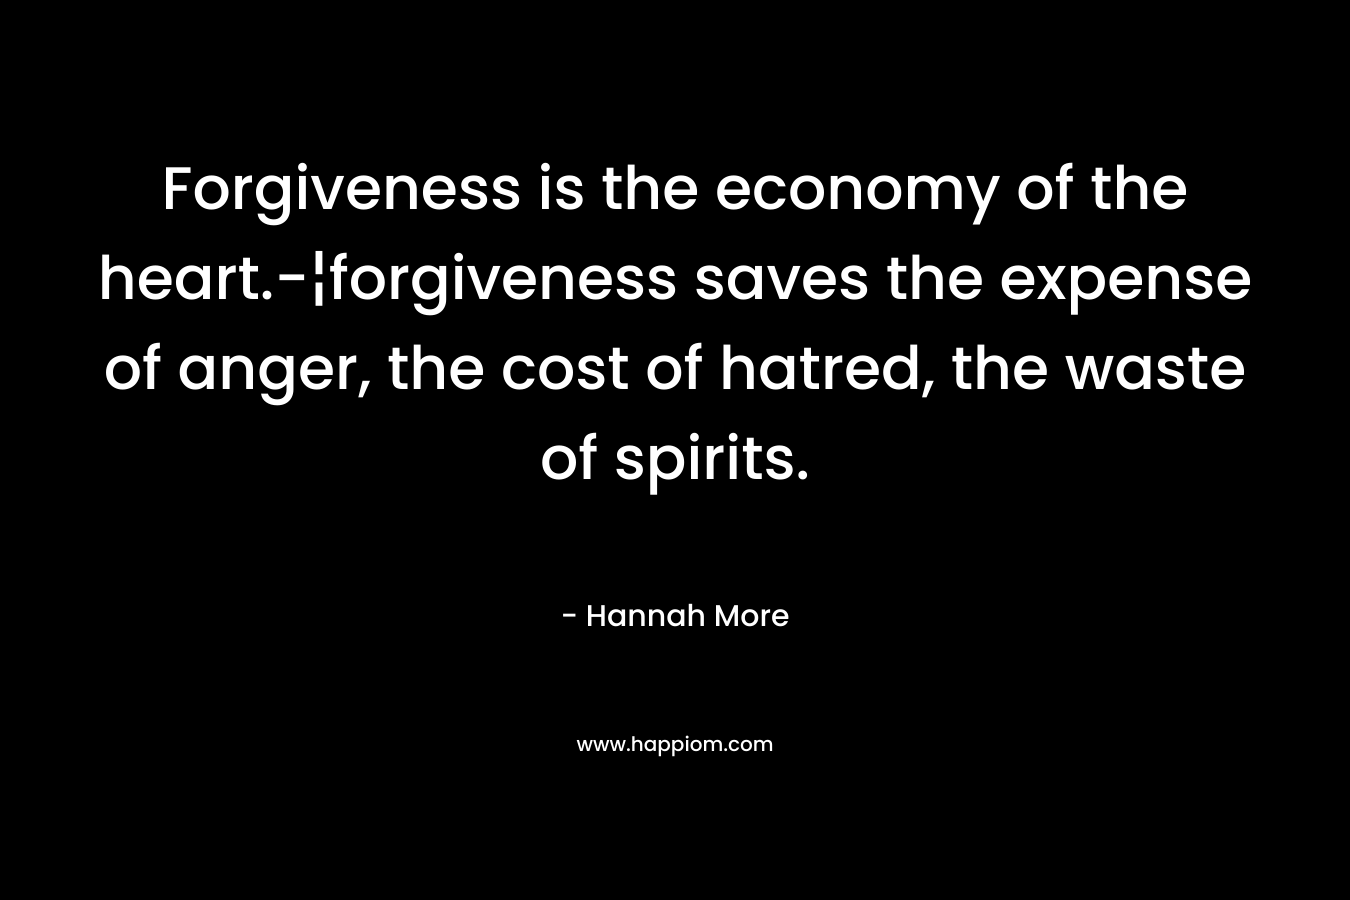 Forgiveness is the economy of the heart.-¦forgiveness saves the expense of anger, the cost of hatred, the waste of spirits. – Hannah More